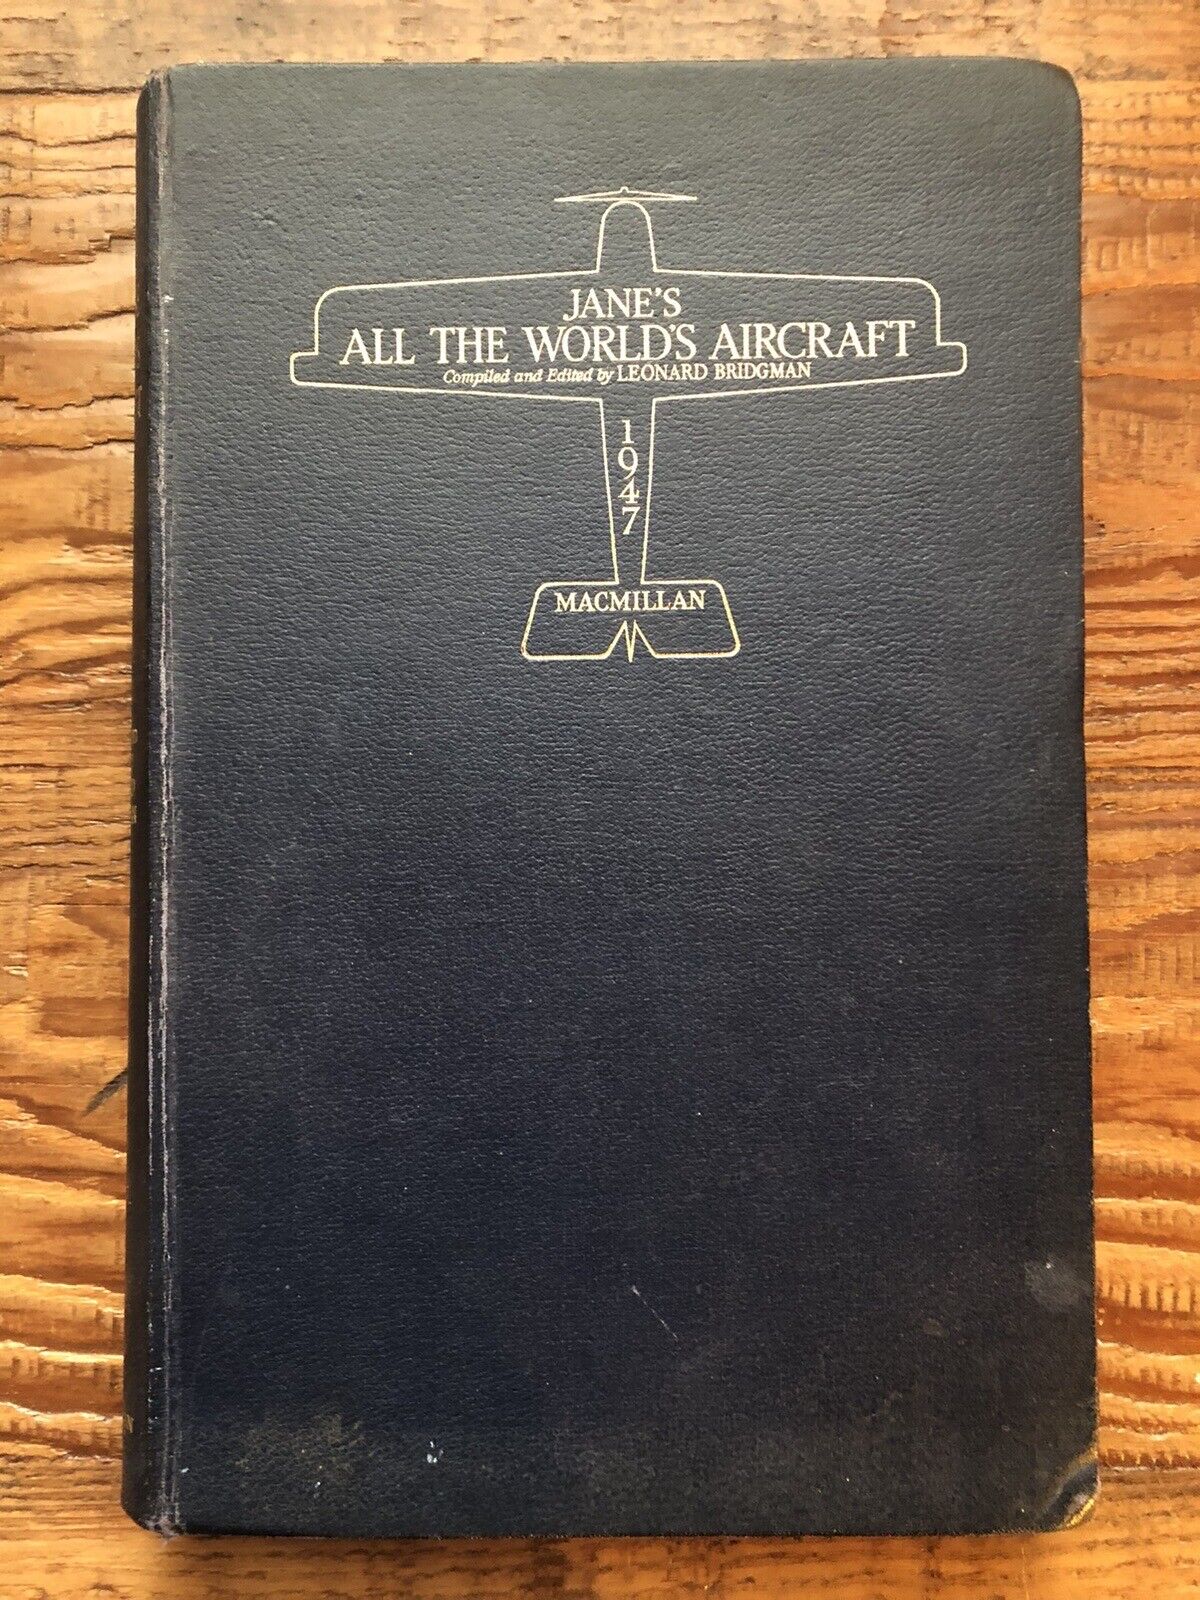 Jane’s All The World’s Aircraft 1947